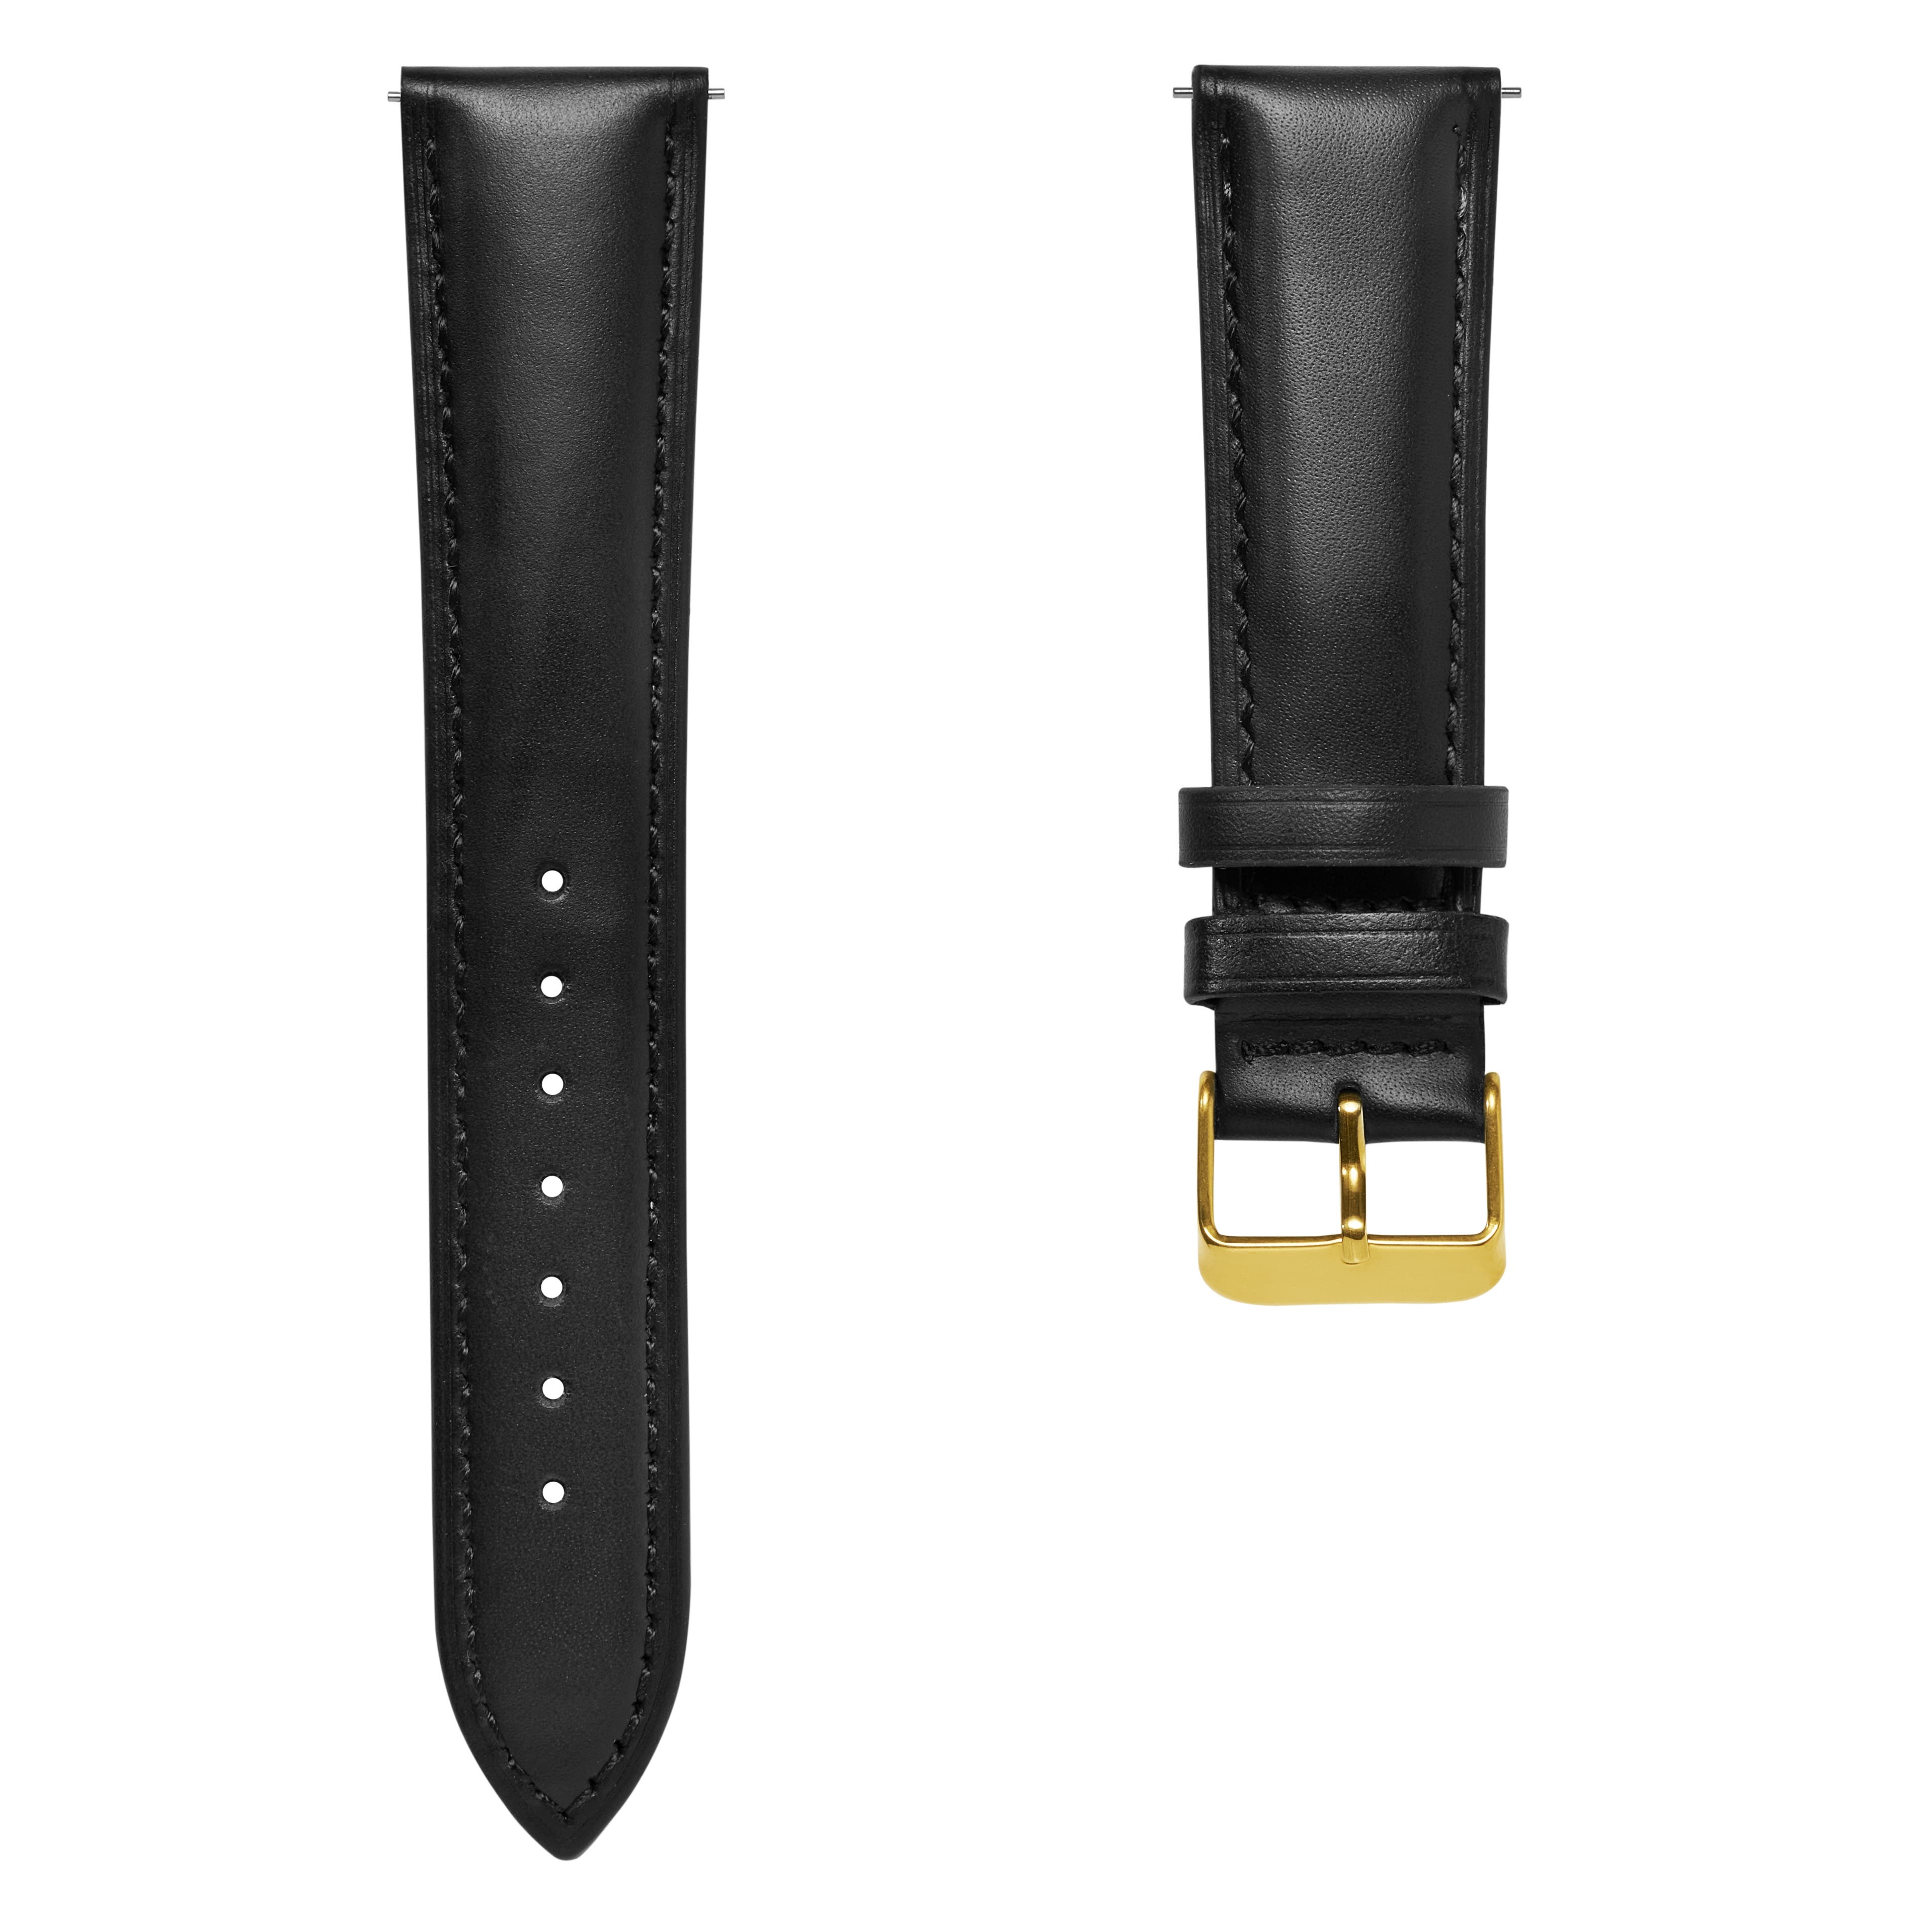 18mm Black Leather Watch Strap with Gold-Tone Buckle – Quick Release